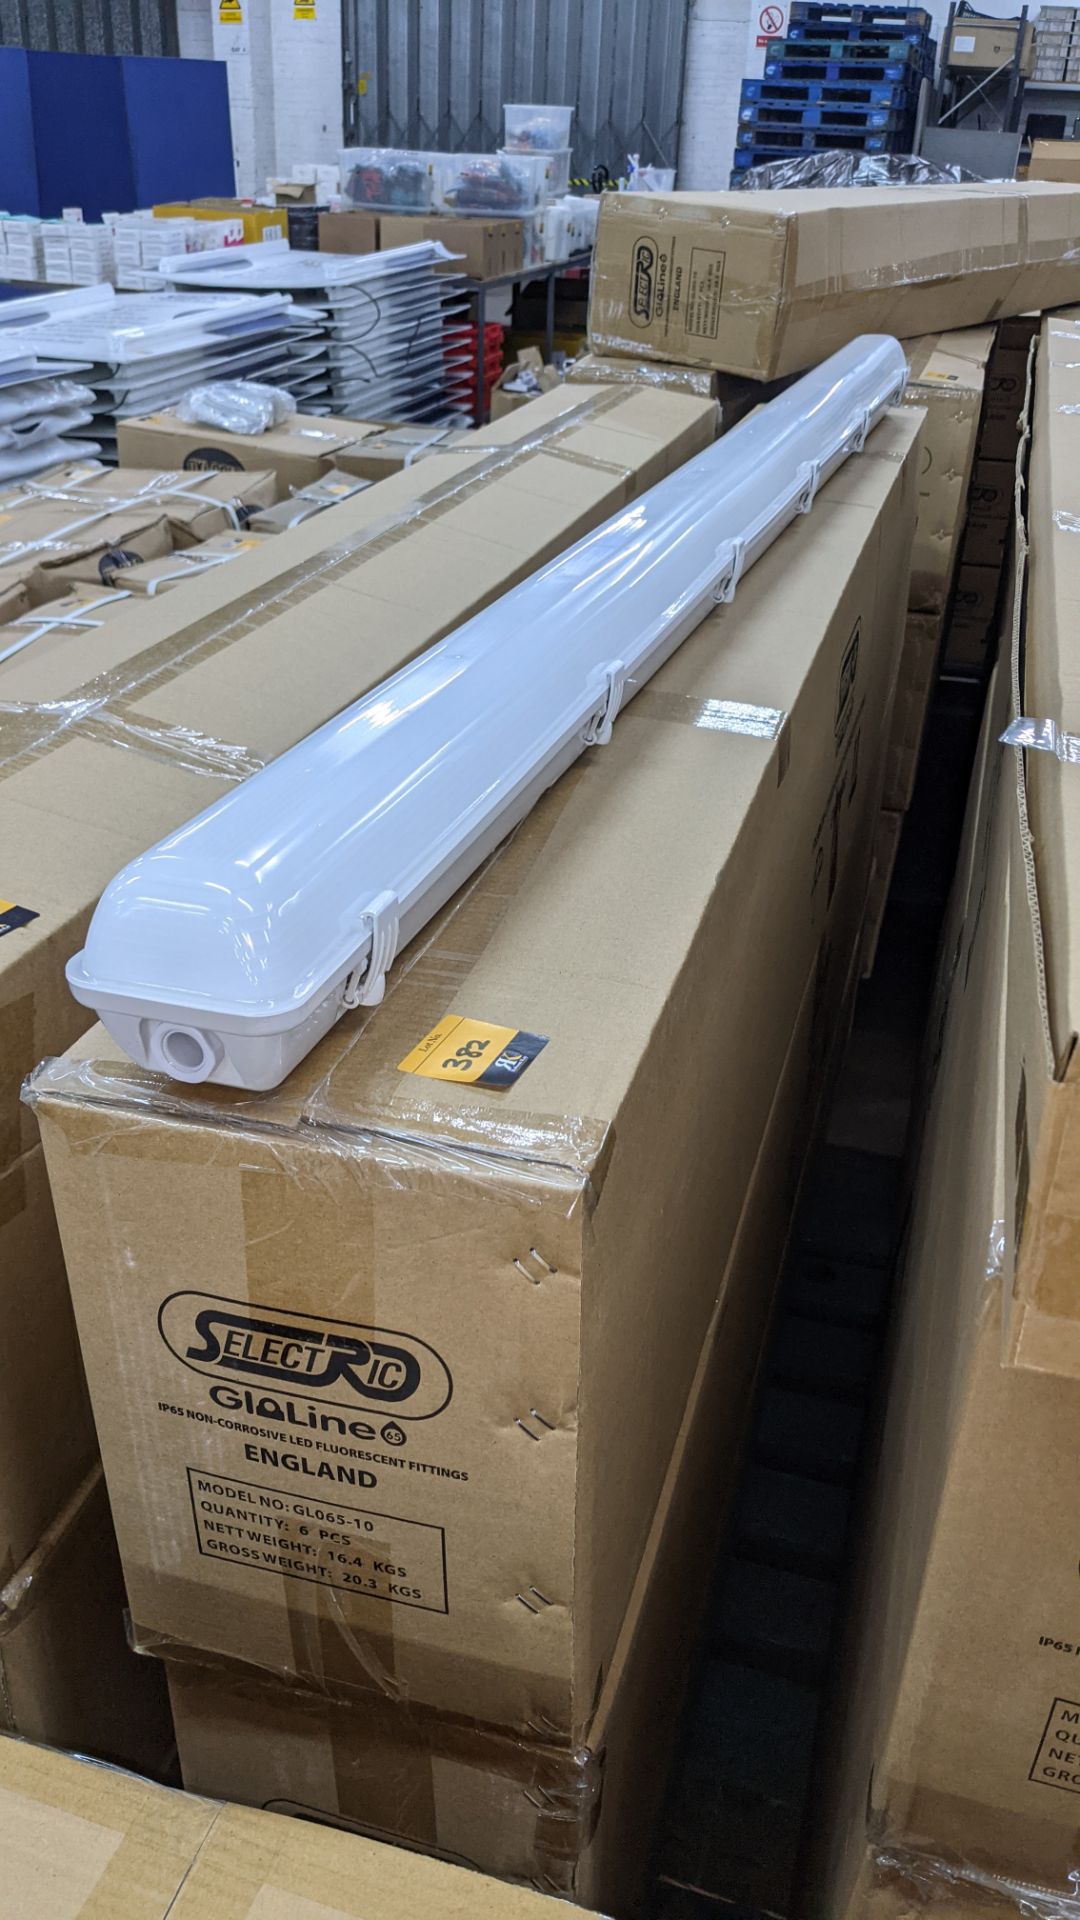 18 off IP65 non-corrosive LED fluorescent light fittings. Model GLO65-10, 6', single LED 40W (with